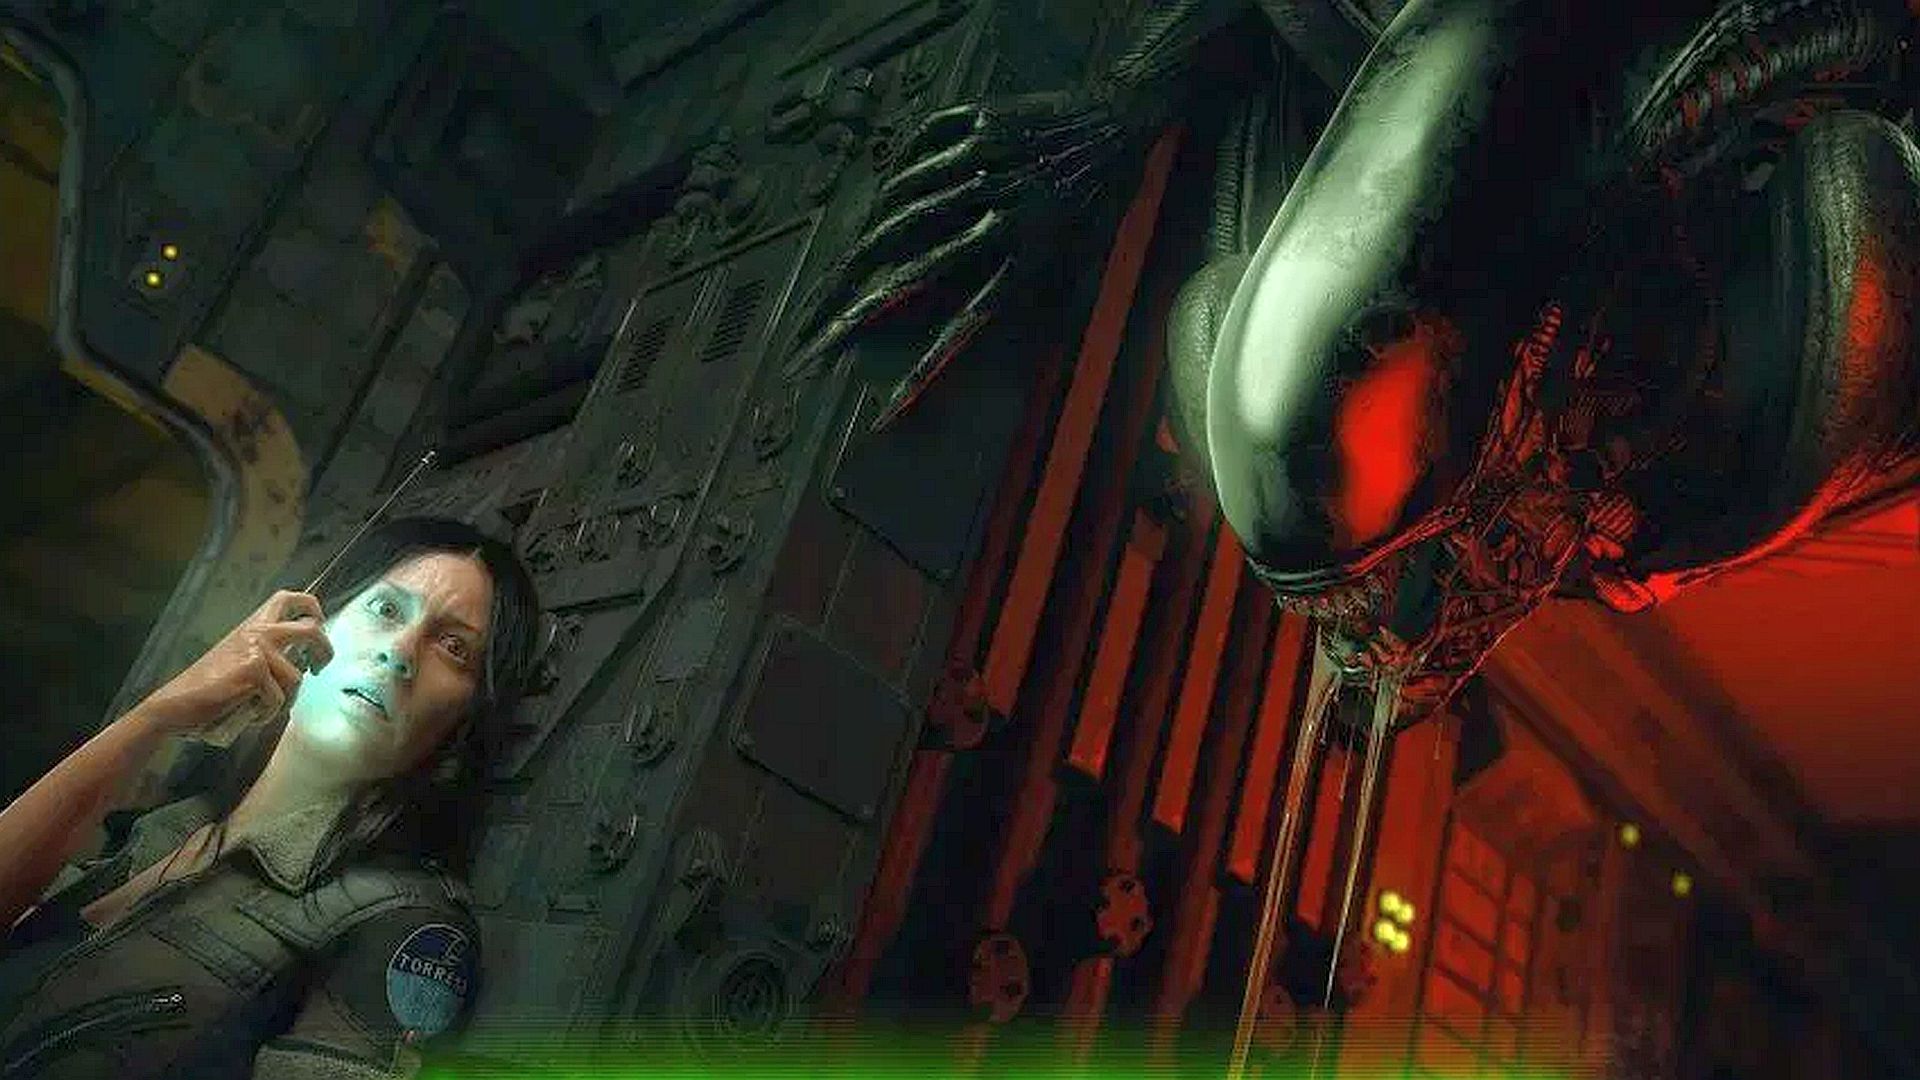 Alien: Blackout is a Teen-rated mobile game